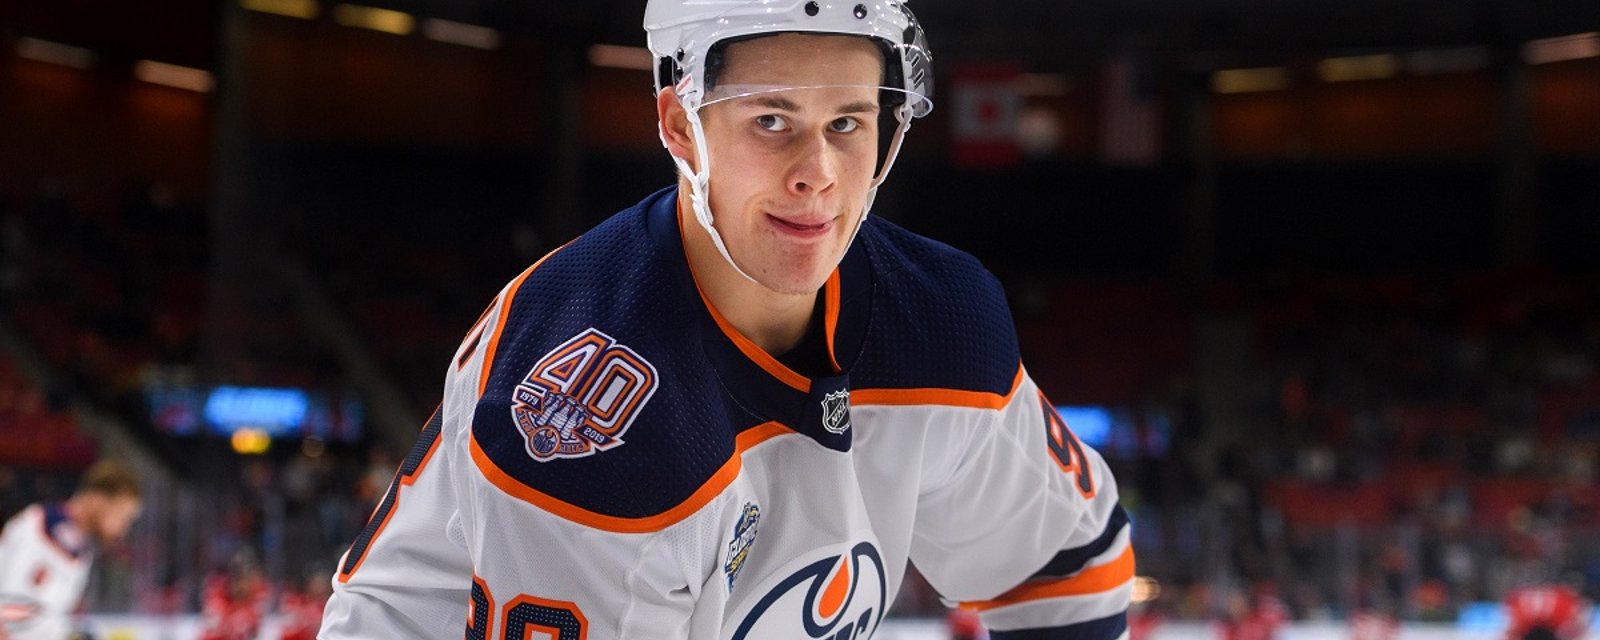 Oilers insider and Ken Holland comment on the future of Jesse Puljujarvi.